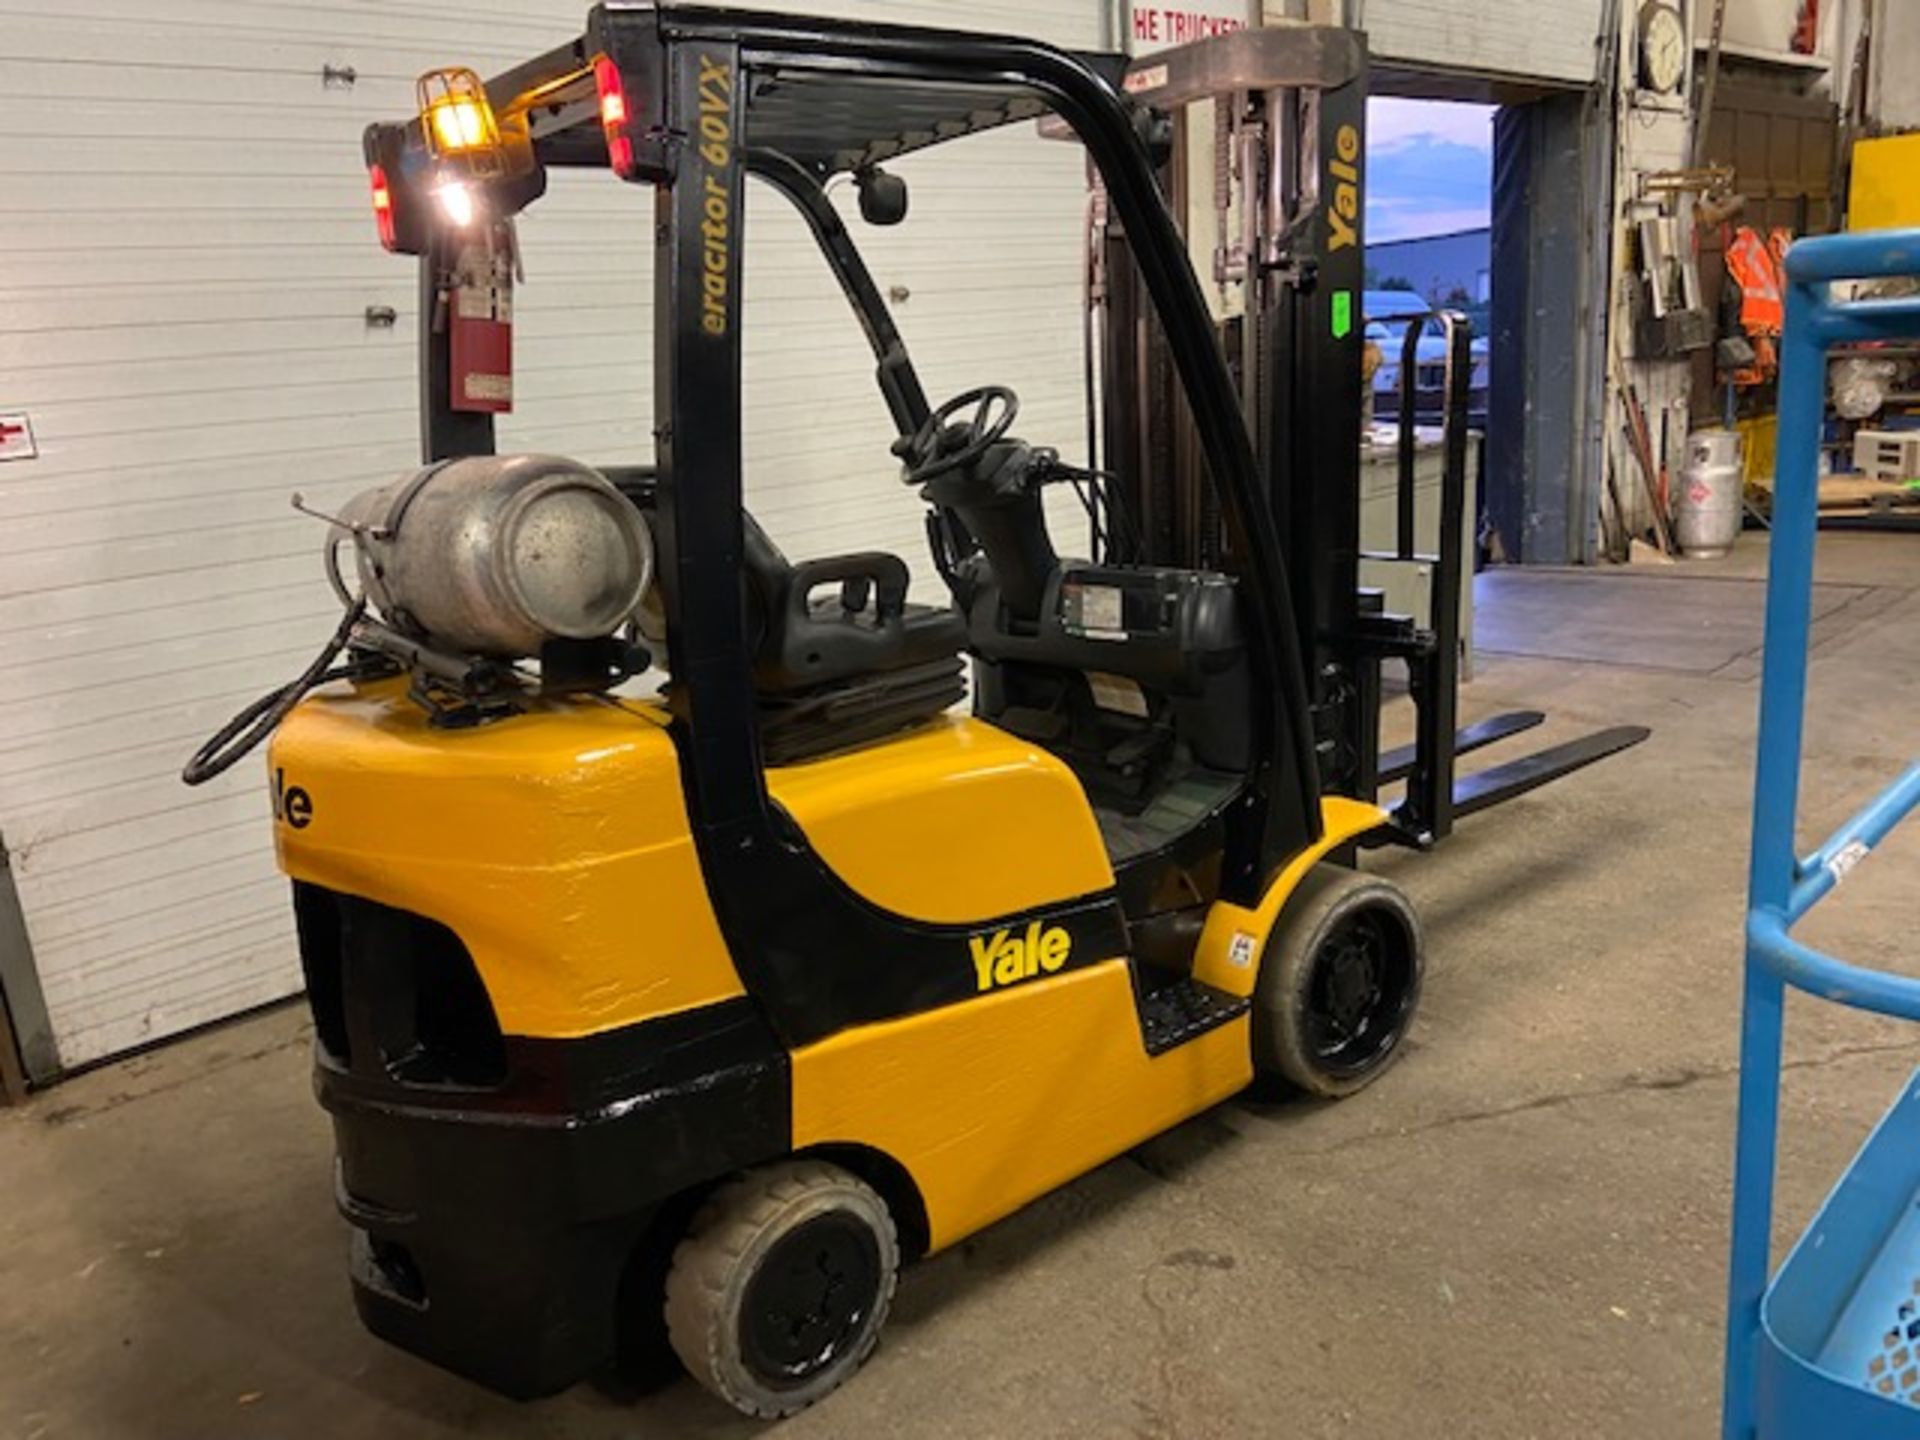 FREE CUSTOMS - 2016 Yale 6000lbs Capacity Forklift LPG (propane) with 3-STAGE MAST with